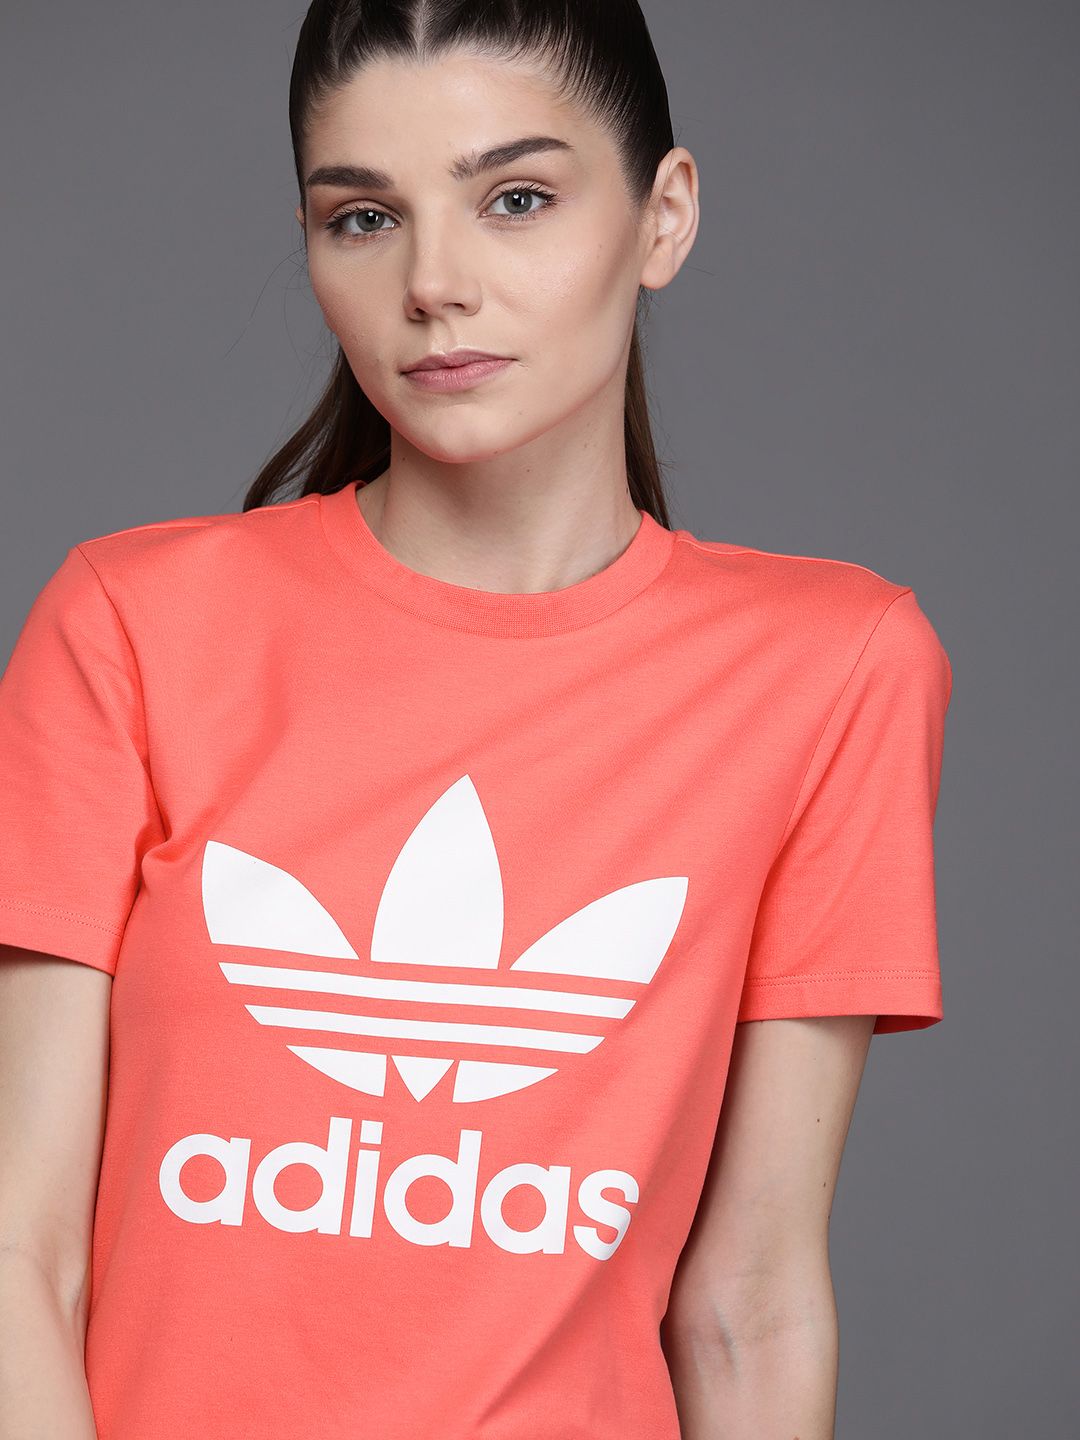 ADIDAS Originals Women Coral Pink & White Trefoil Brand Logo Print Sustainable T-shirt Price in India